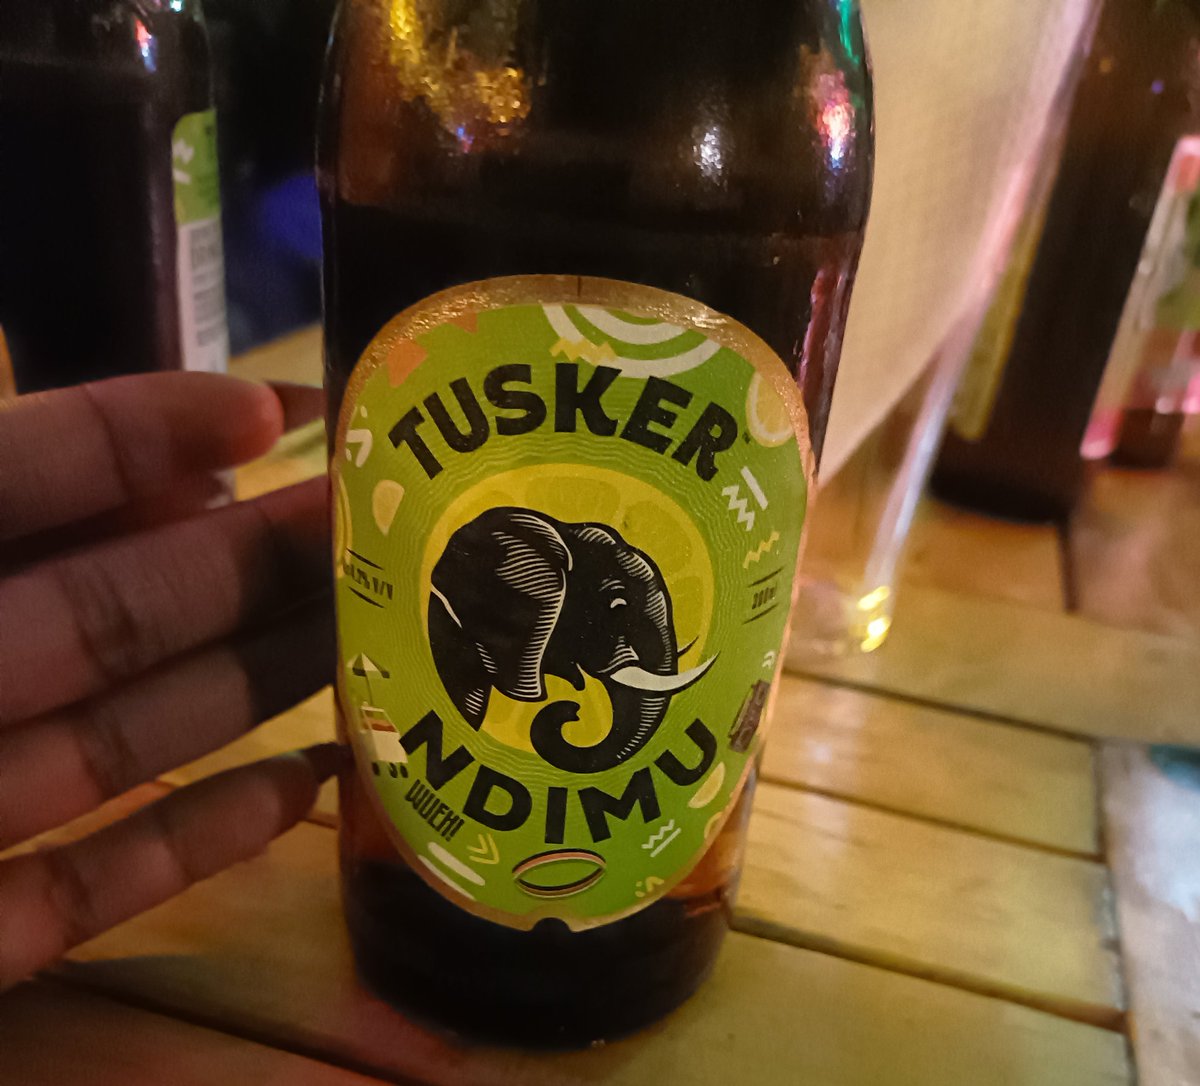 What the actual fuck is Tusker Ndimu???????